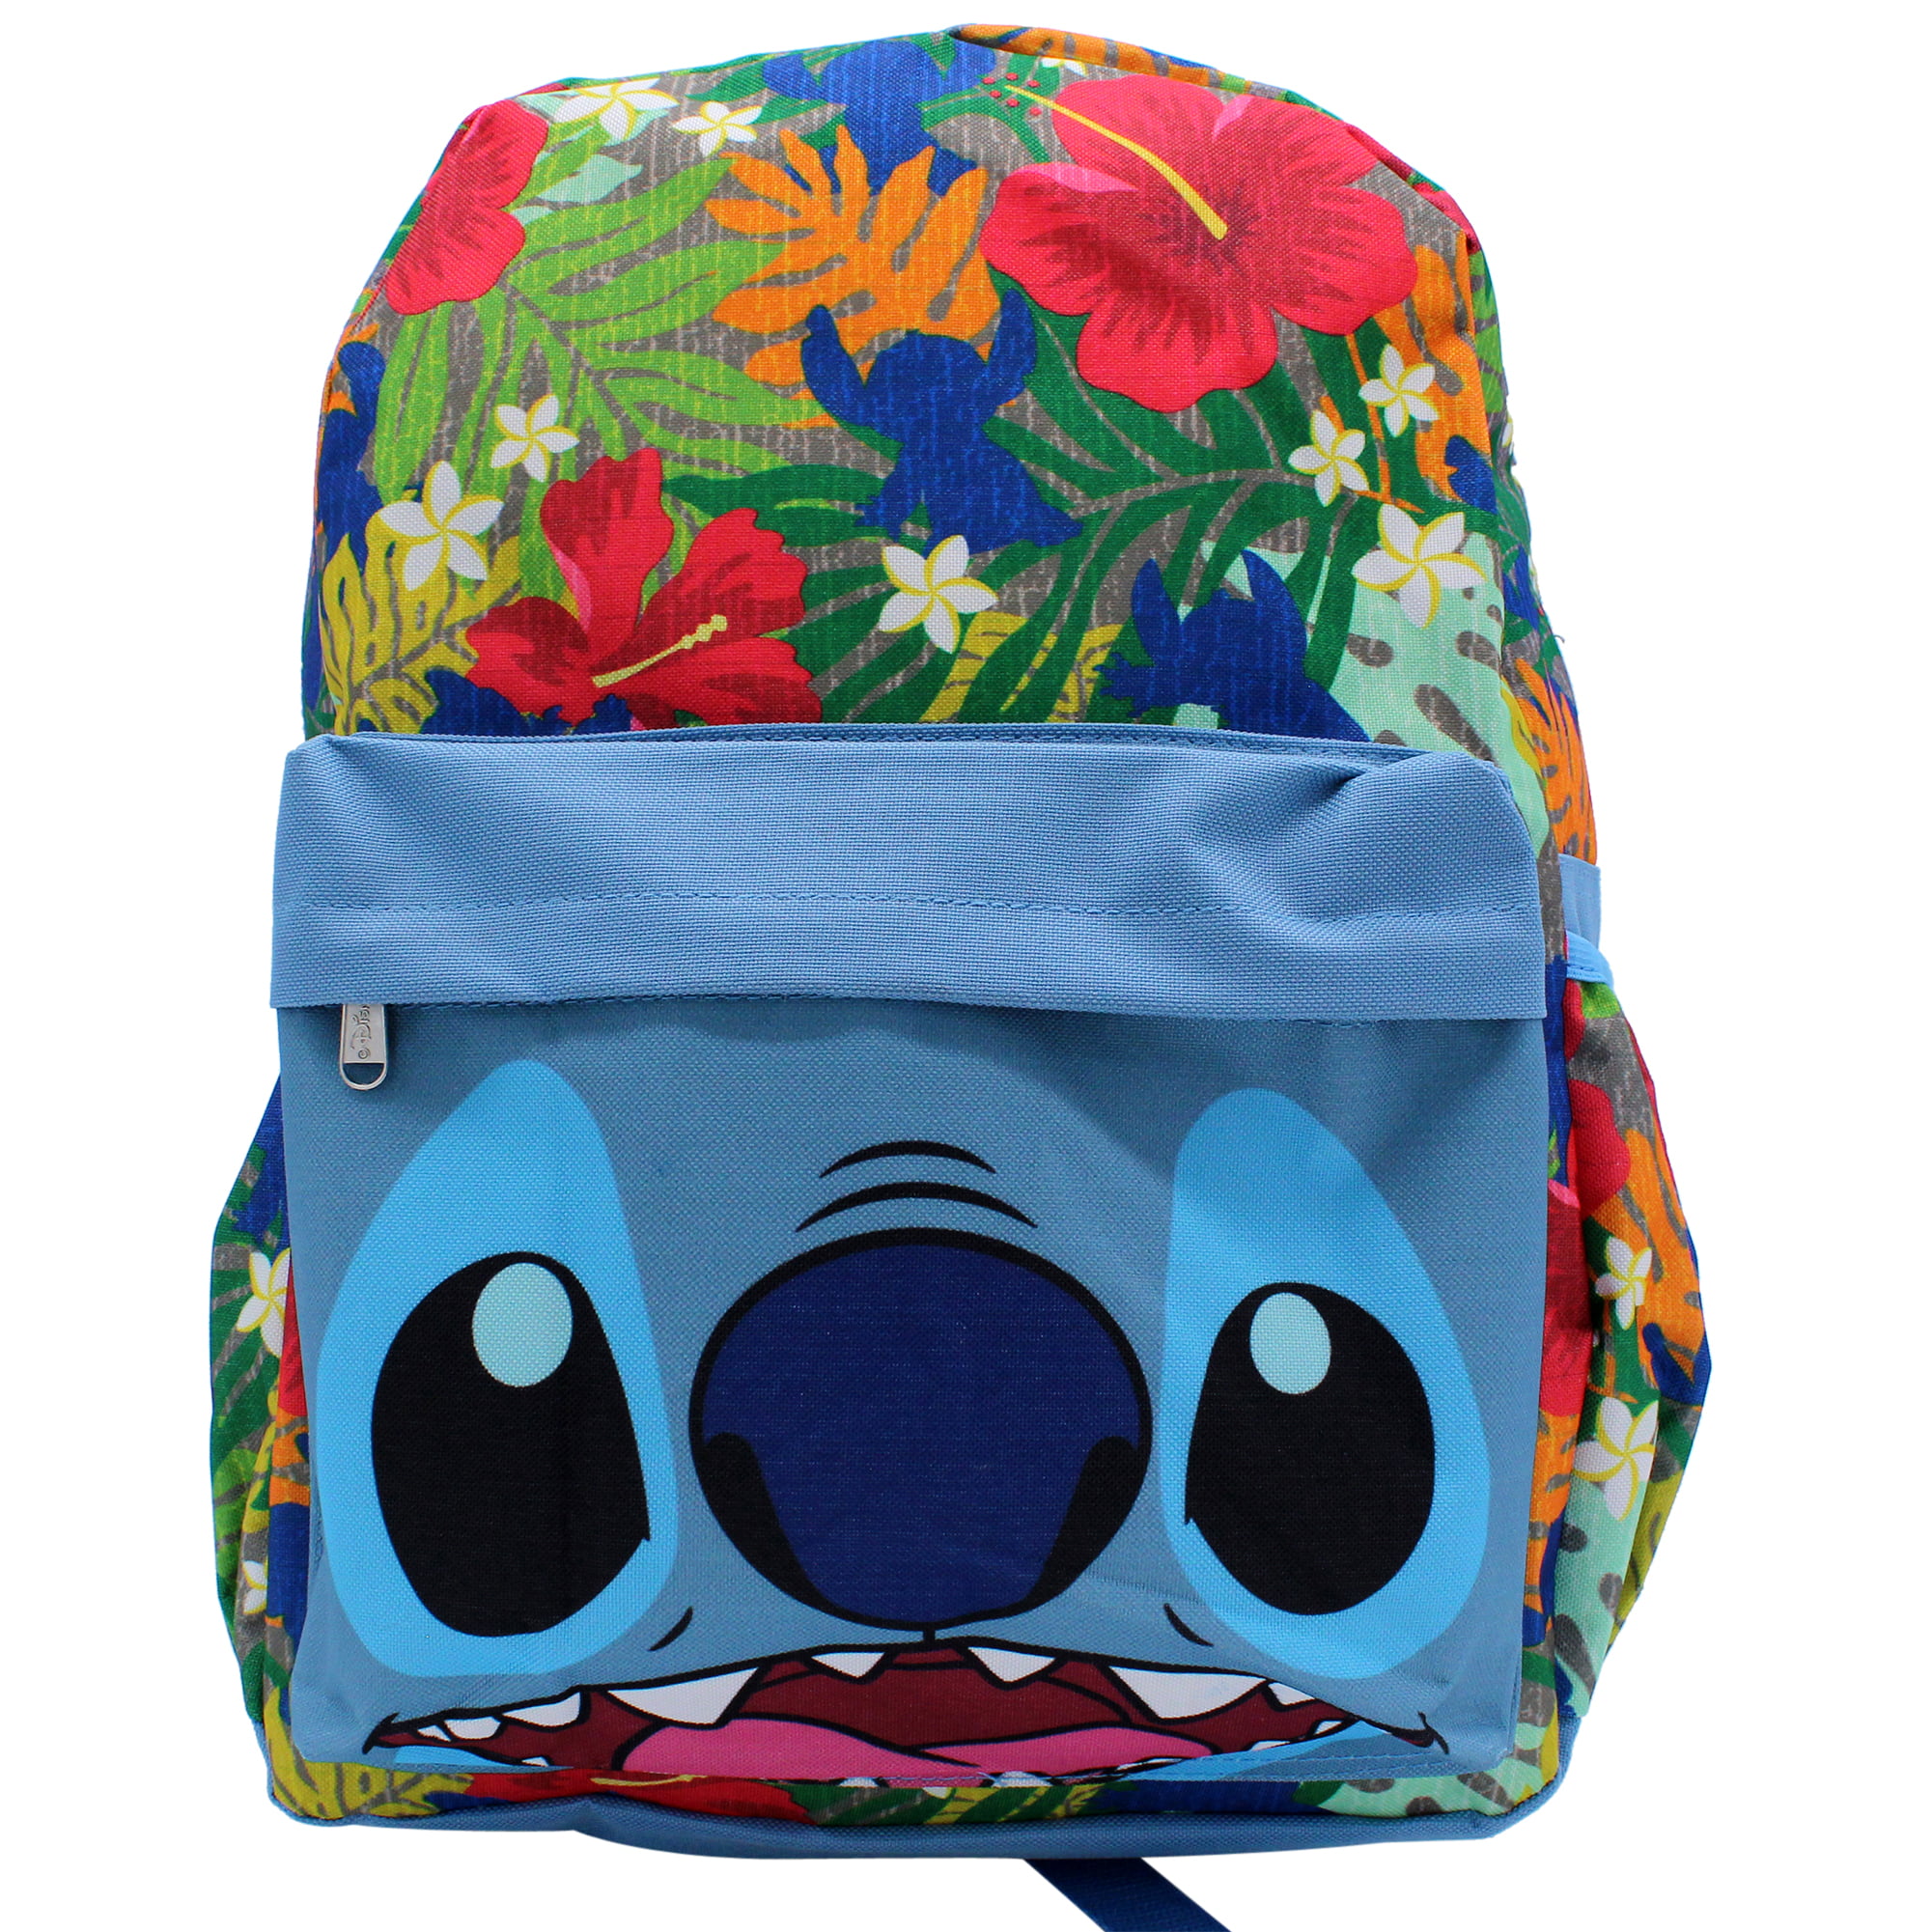 Lilo and Stitch Swimming Backpack,Drawstring Bags Zipped Front Pocket for Girls 